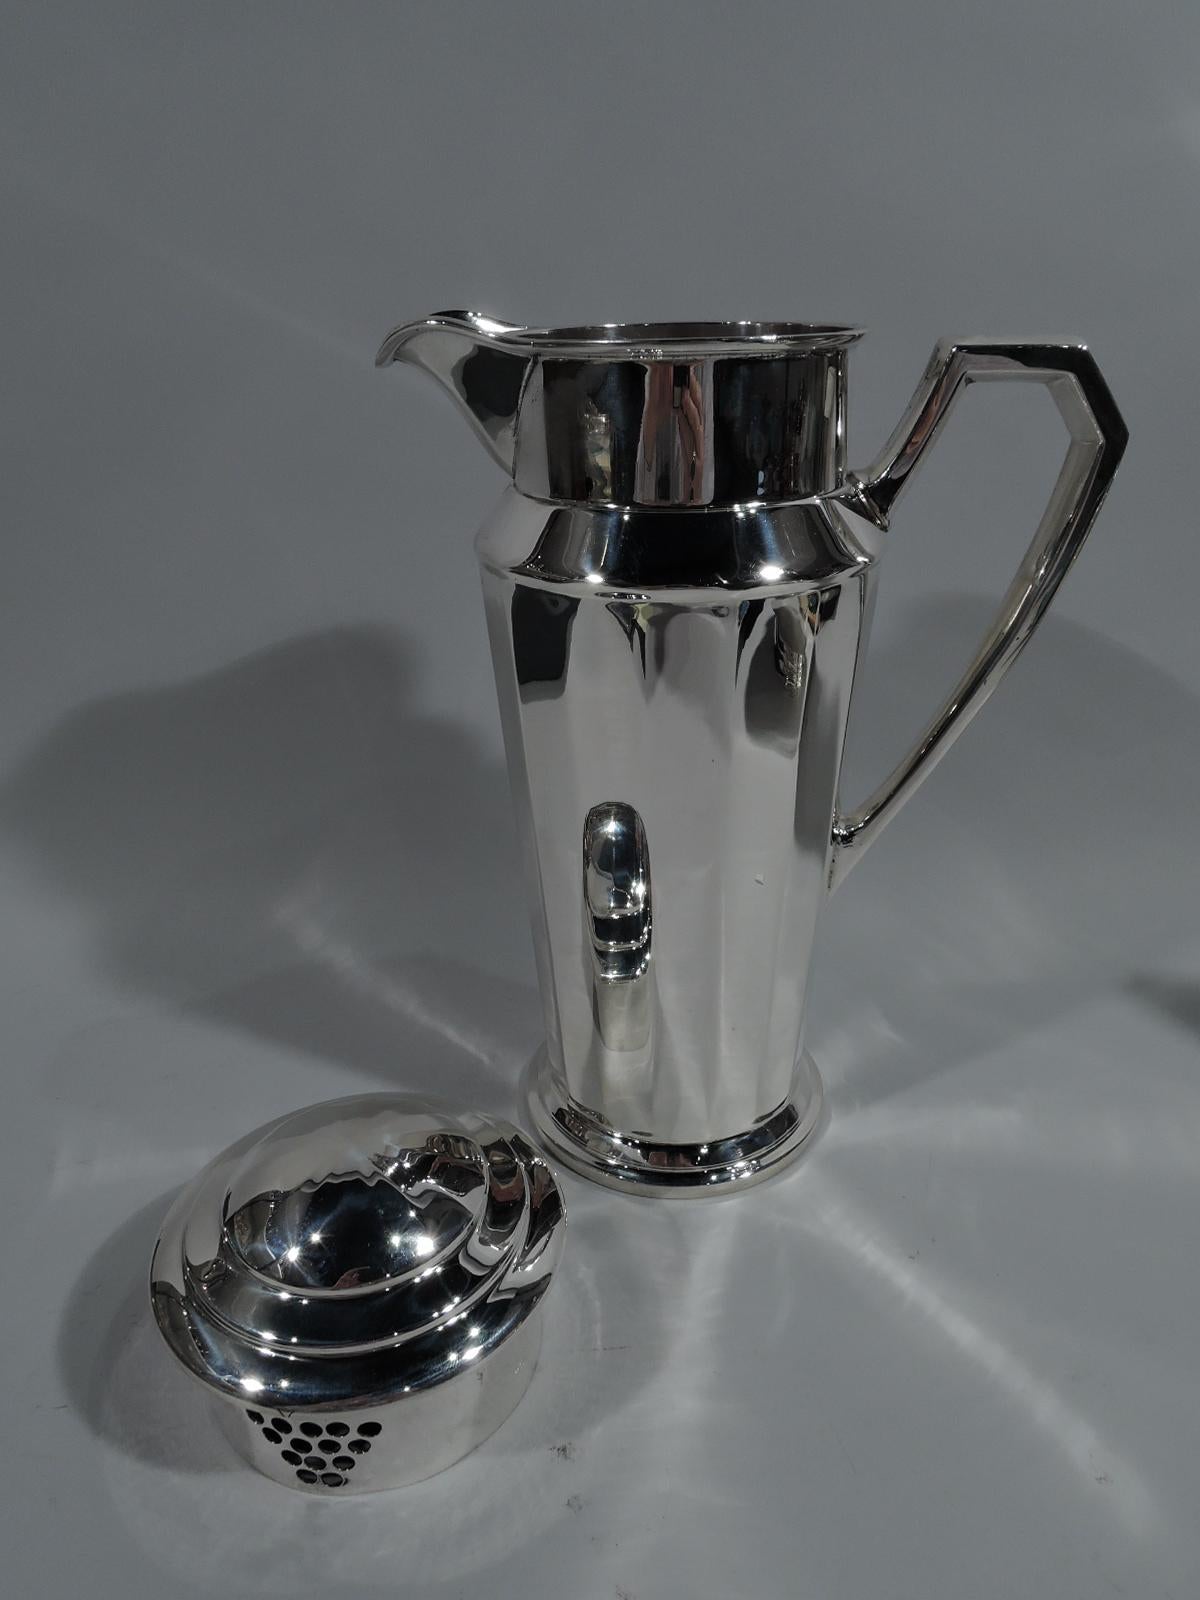 Art Deco sterling silver cocktail Shaker. Made by Frank W. Smith in Gardner, Mass, circa 1925. Tapering and faceted body on stepped foot. Canted shoulder and straight drum-form neck with large spout and built-in strainer, and faceted high-looping